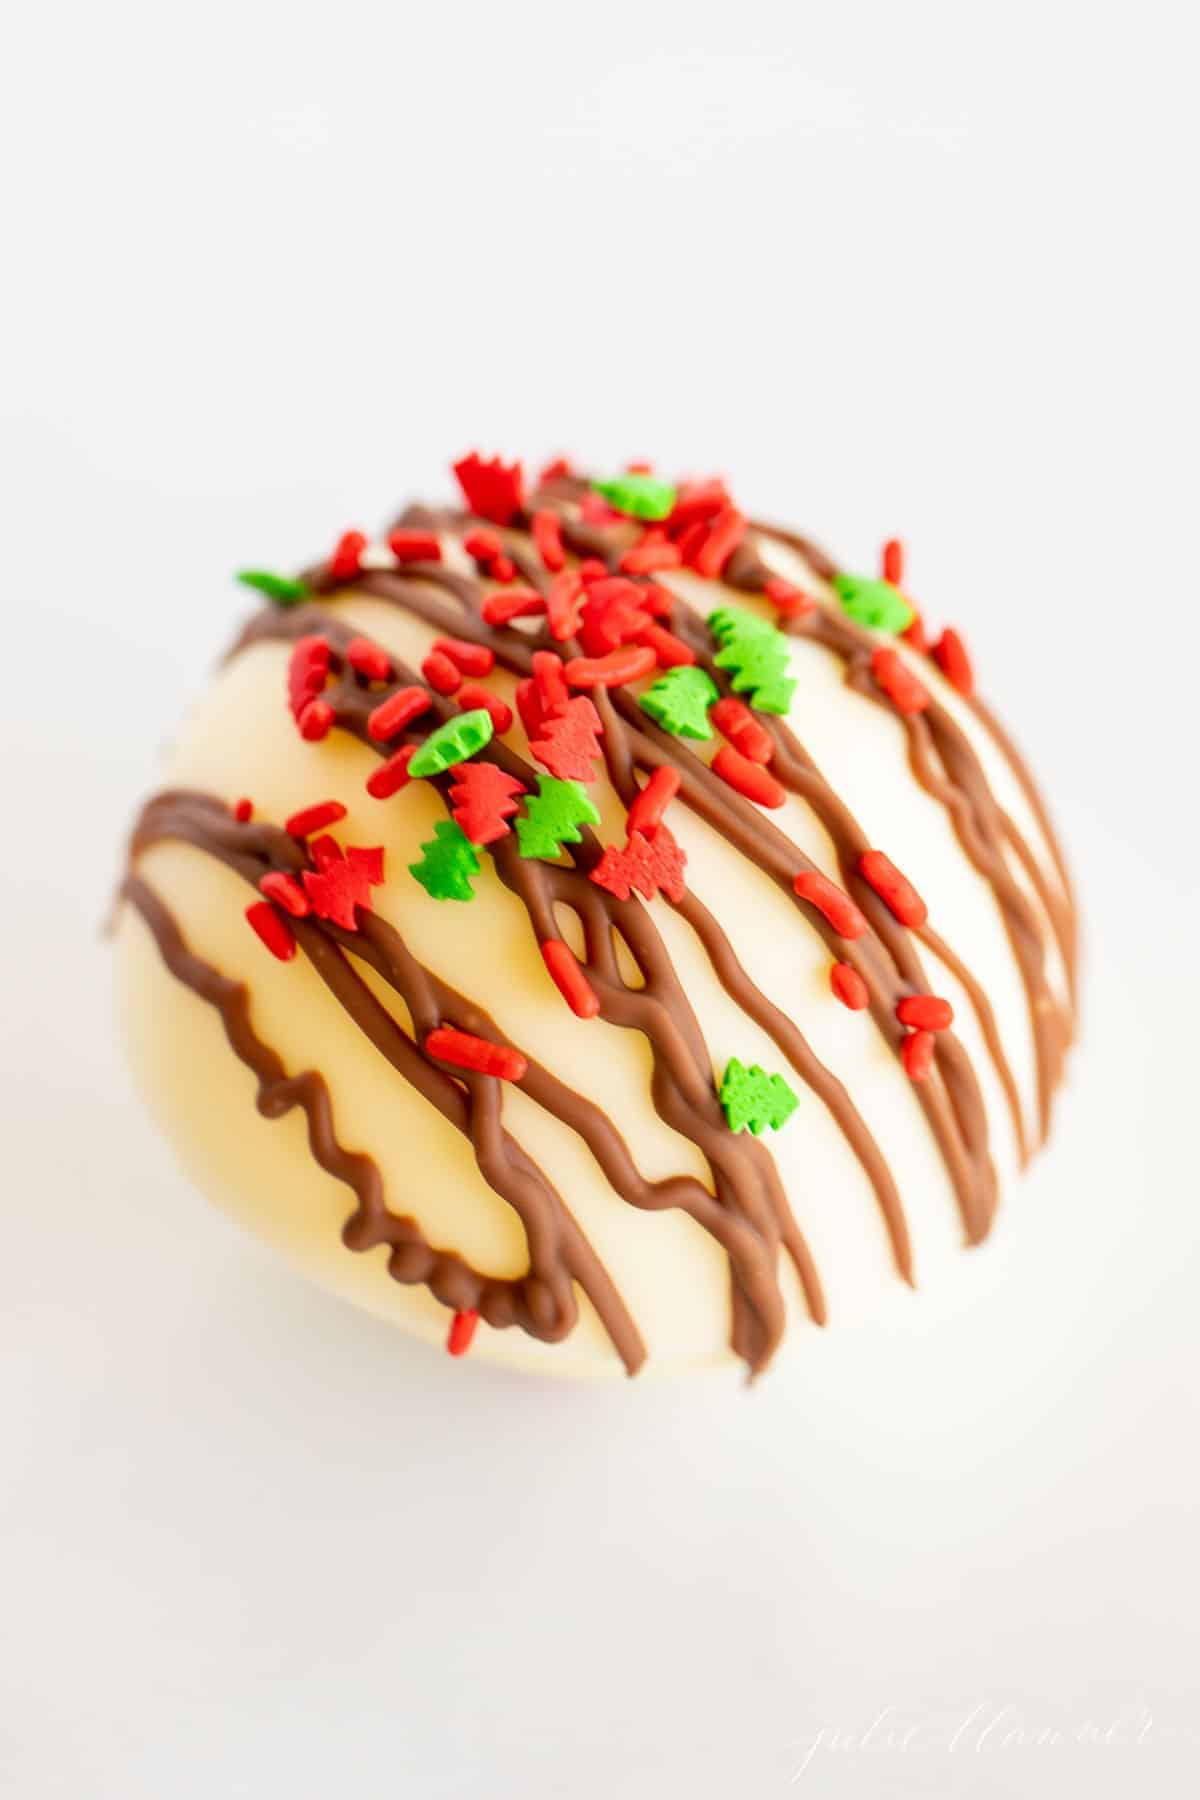 A white plate with a white chocolate hot chocolate bomb topped in Christmas sprinkles.